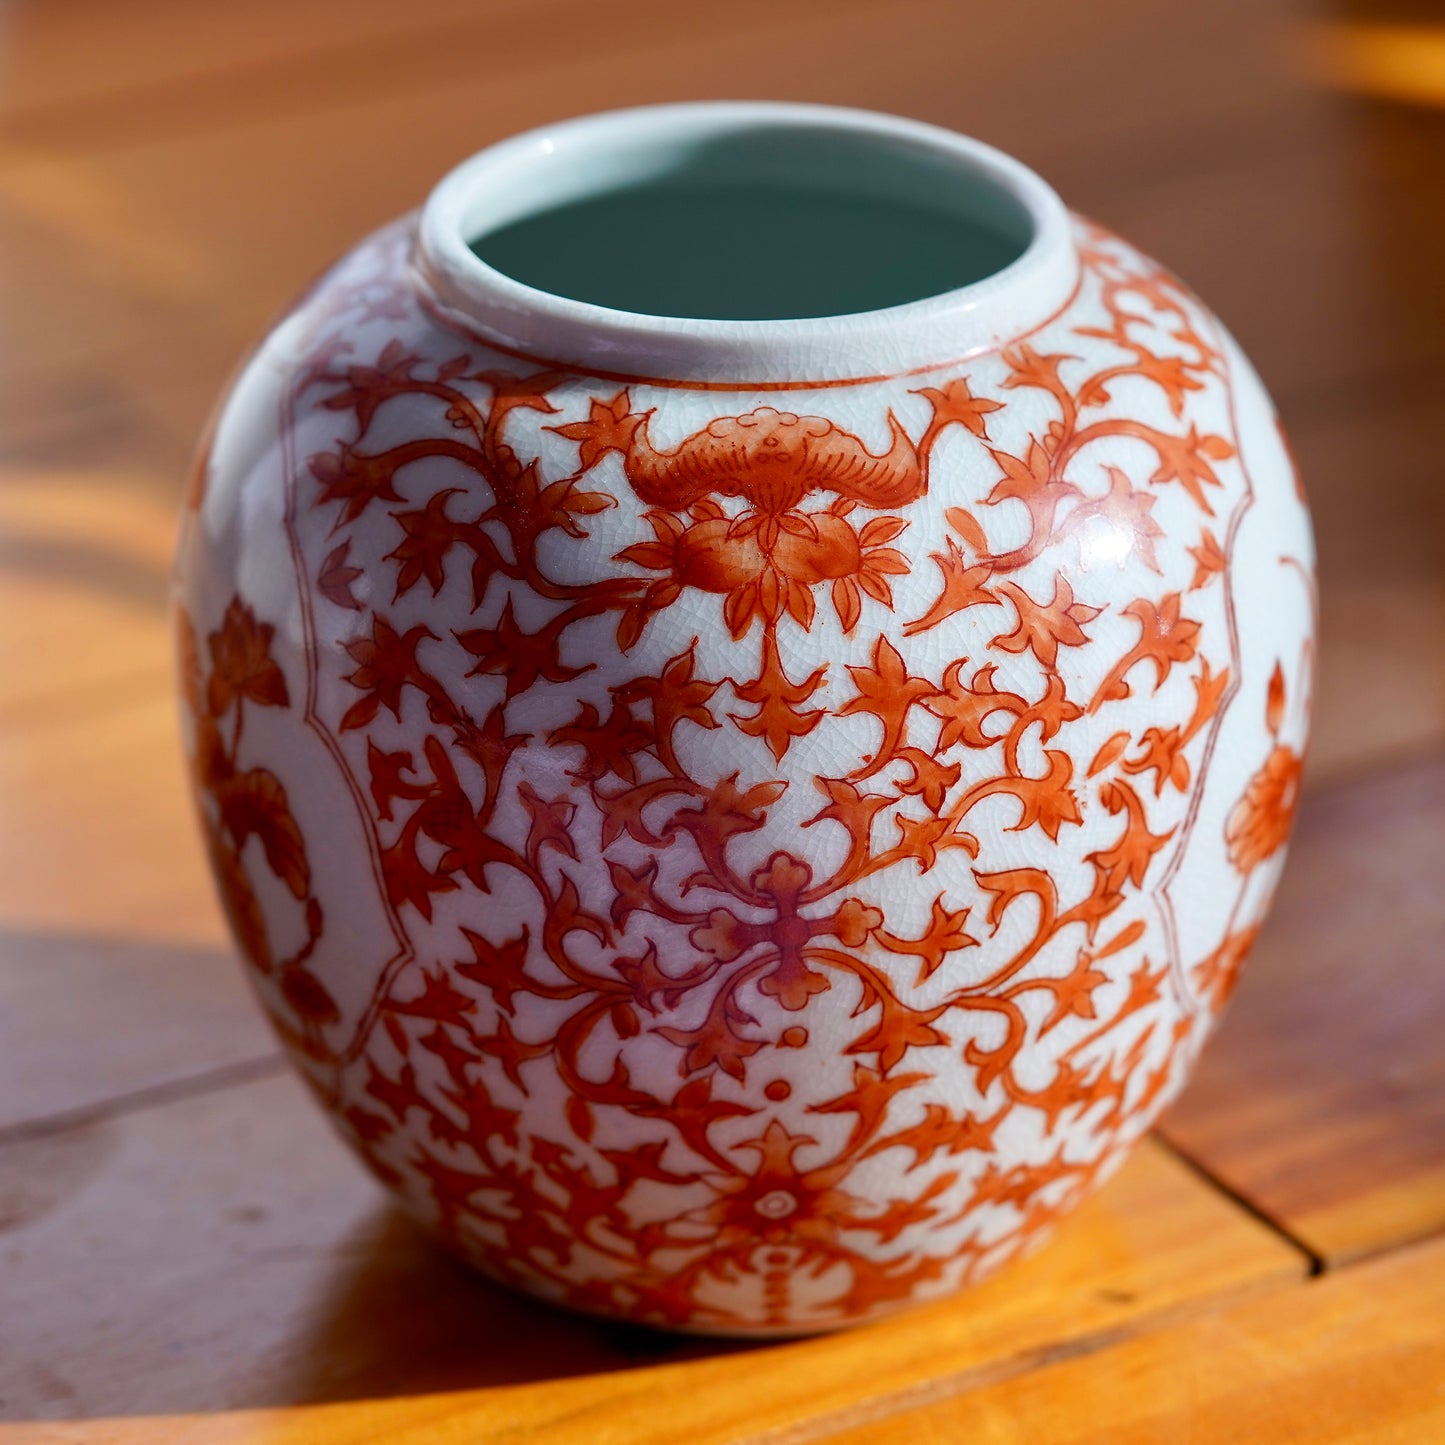 Load image into Gallery viewer, Back side of vintage white and orange handpainted Japanese porcelain vase with flowers, displayed on light wood floor.
